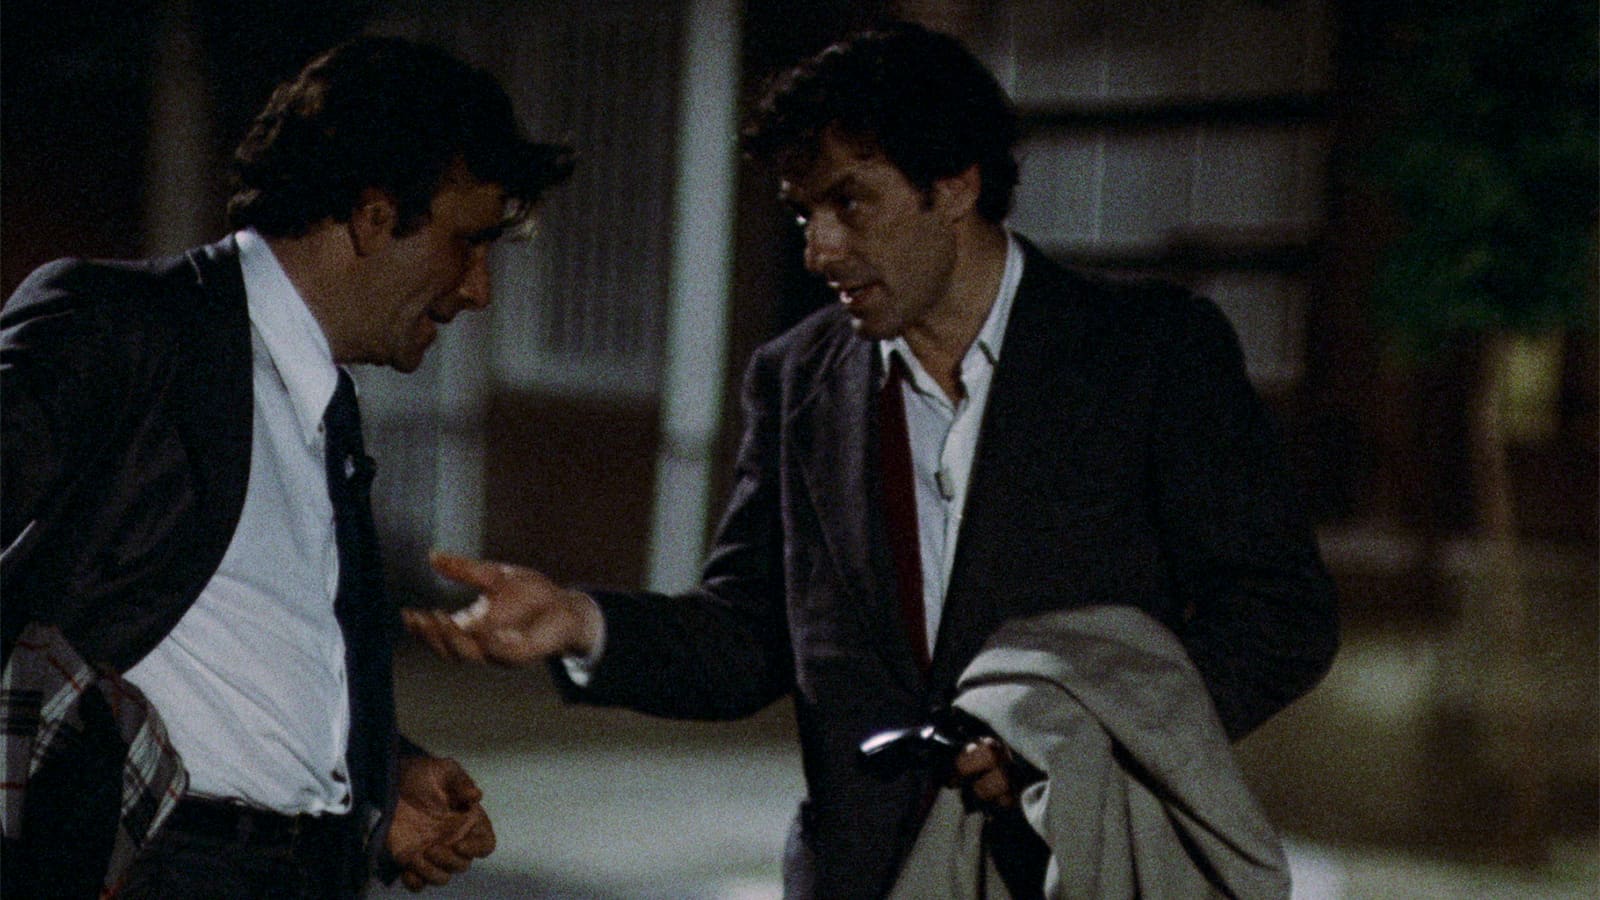 Mikey and Nicky Argue in the Street